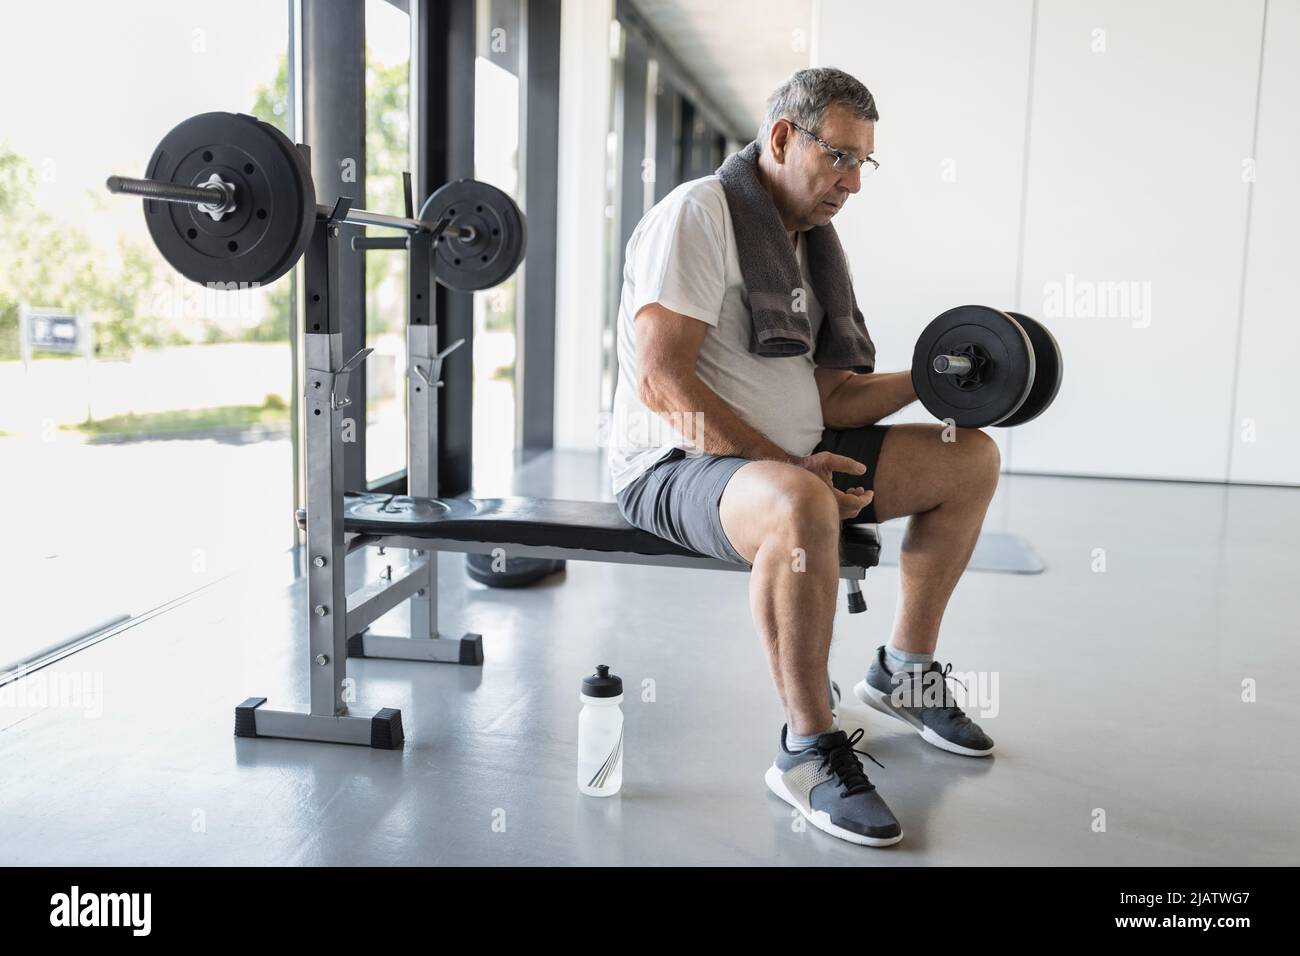 Active and healthy senior exercising in a gym Stock Photo